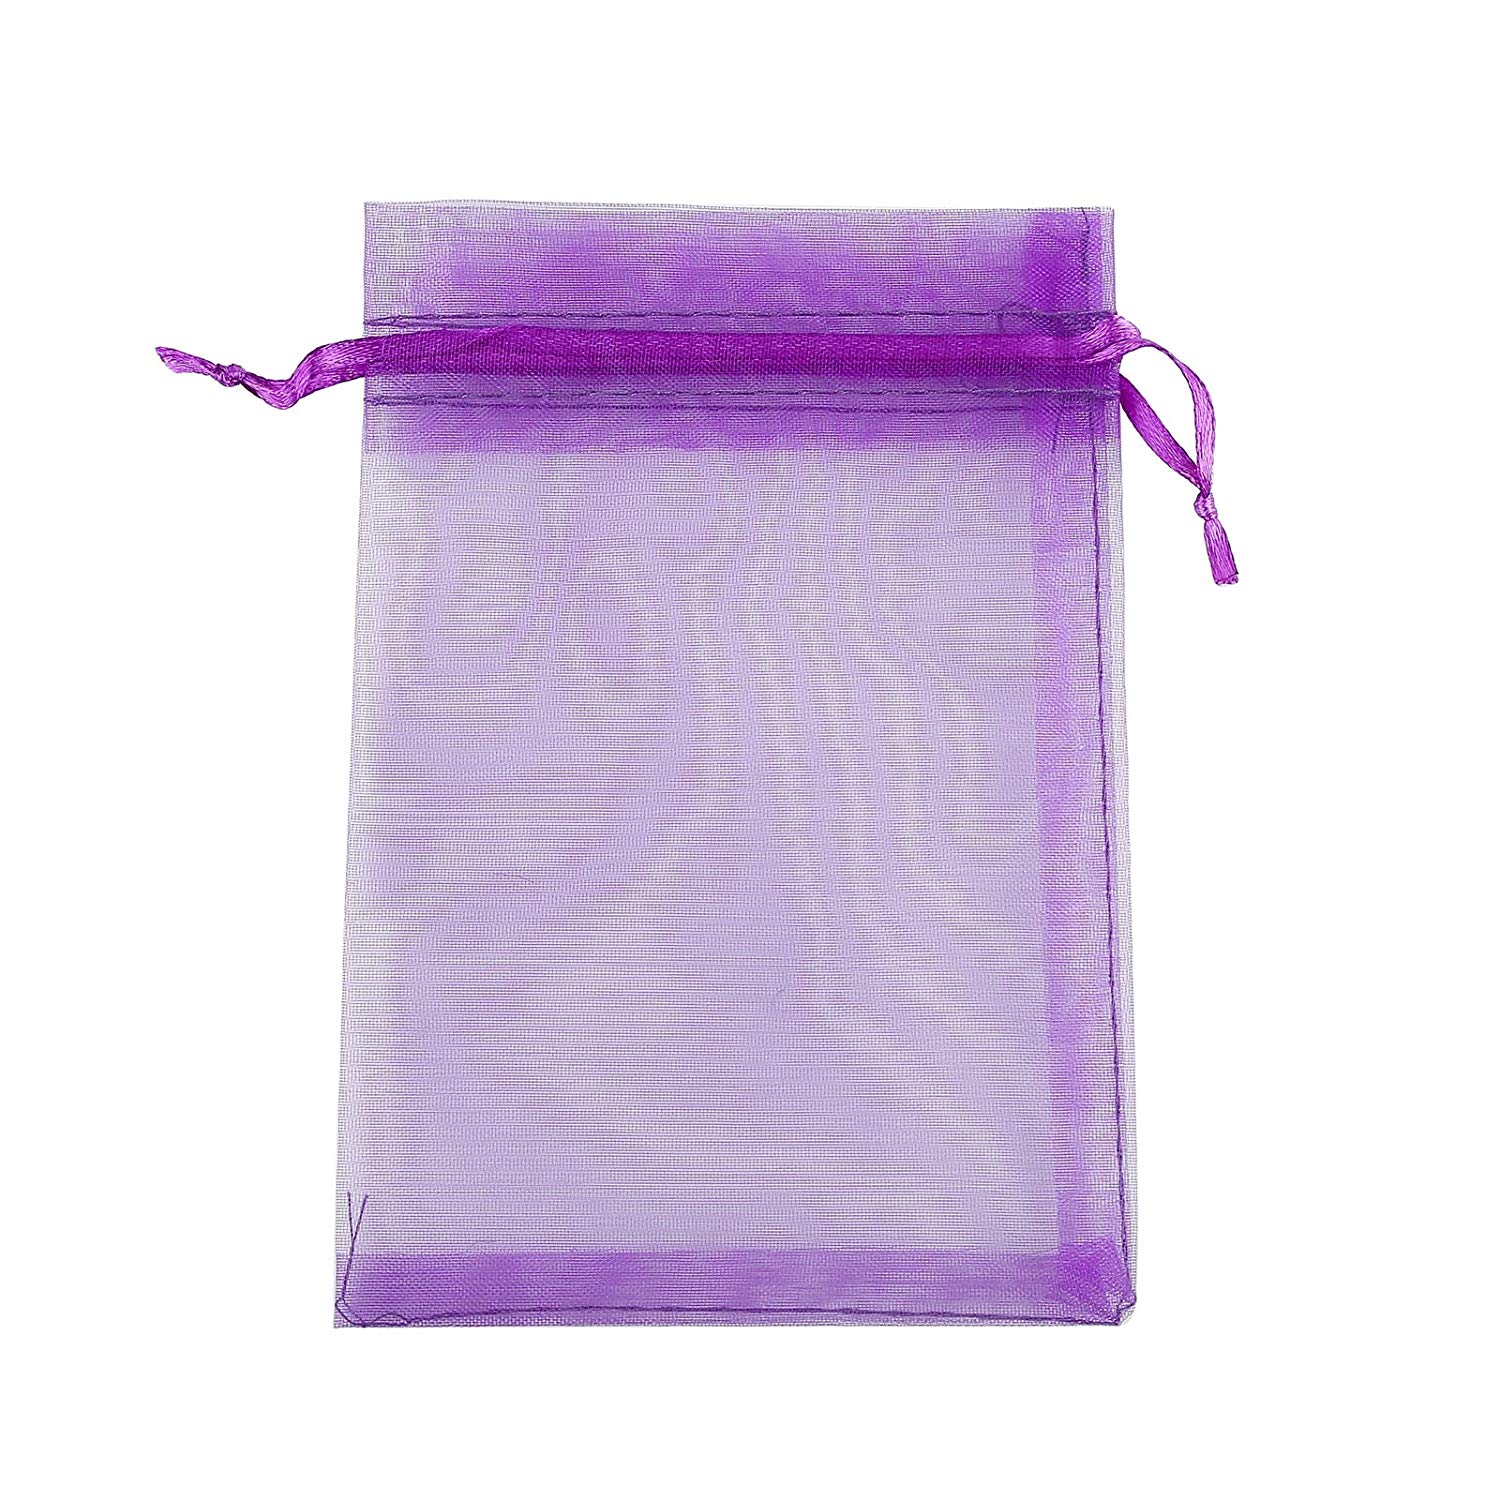 jewelry pouch packing material purple dark silk bags